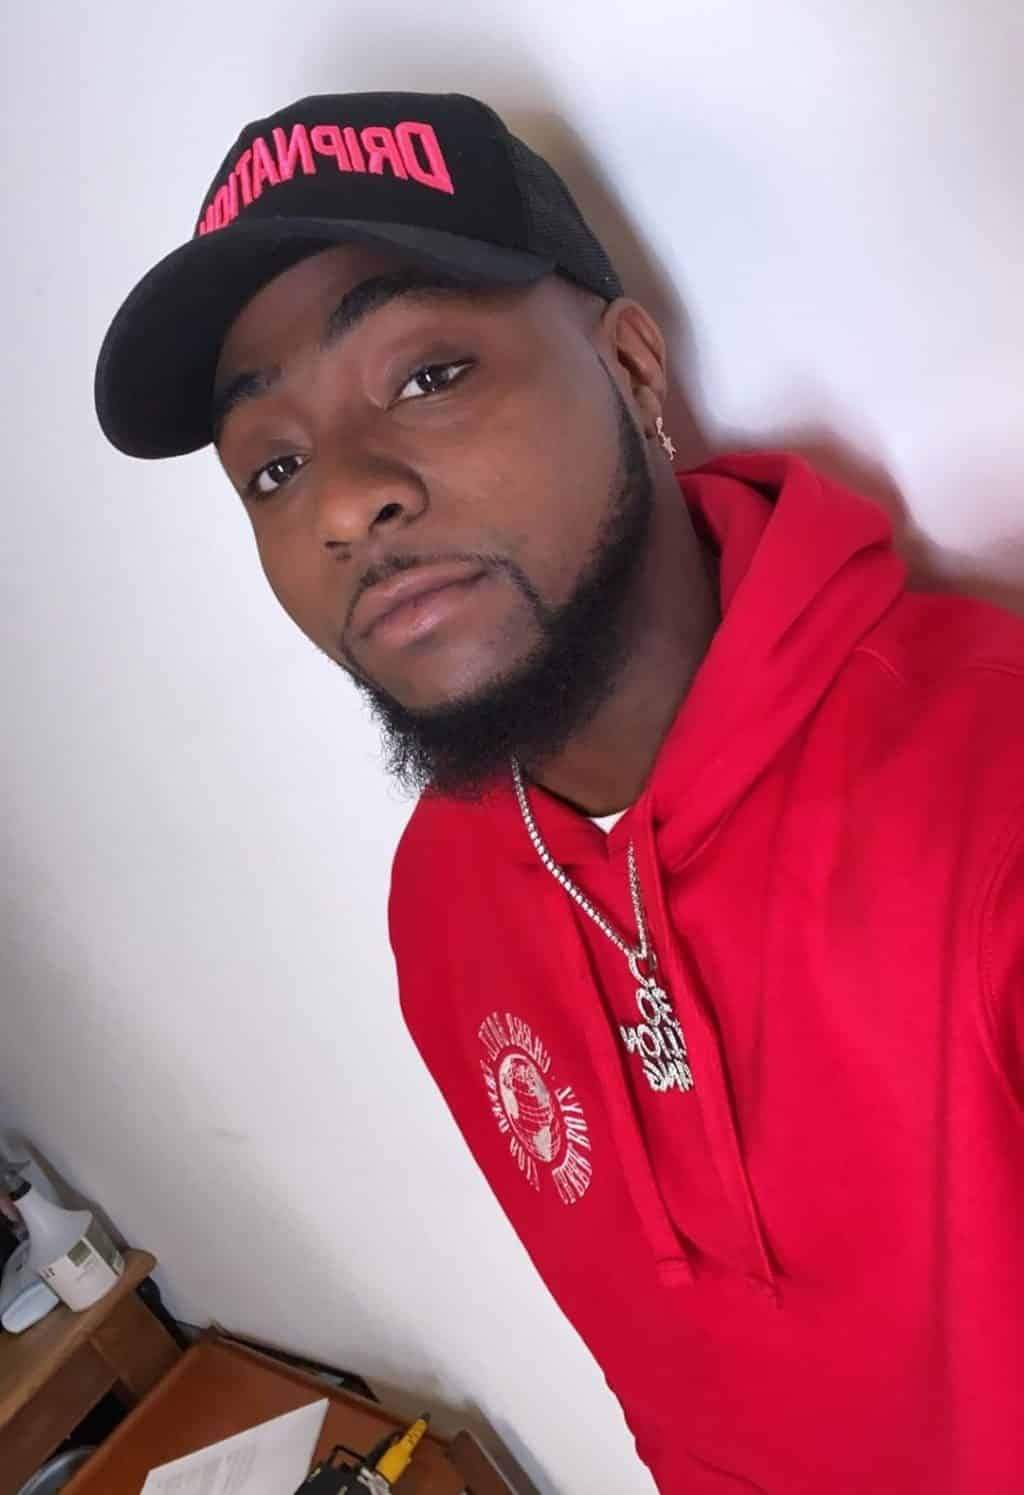 'We did it to congratulate him in a unique way'- Davido's accusers apologize after he vowed to jail them (Video)